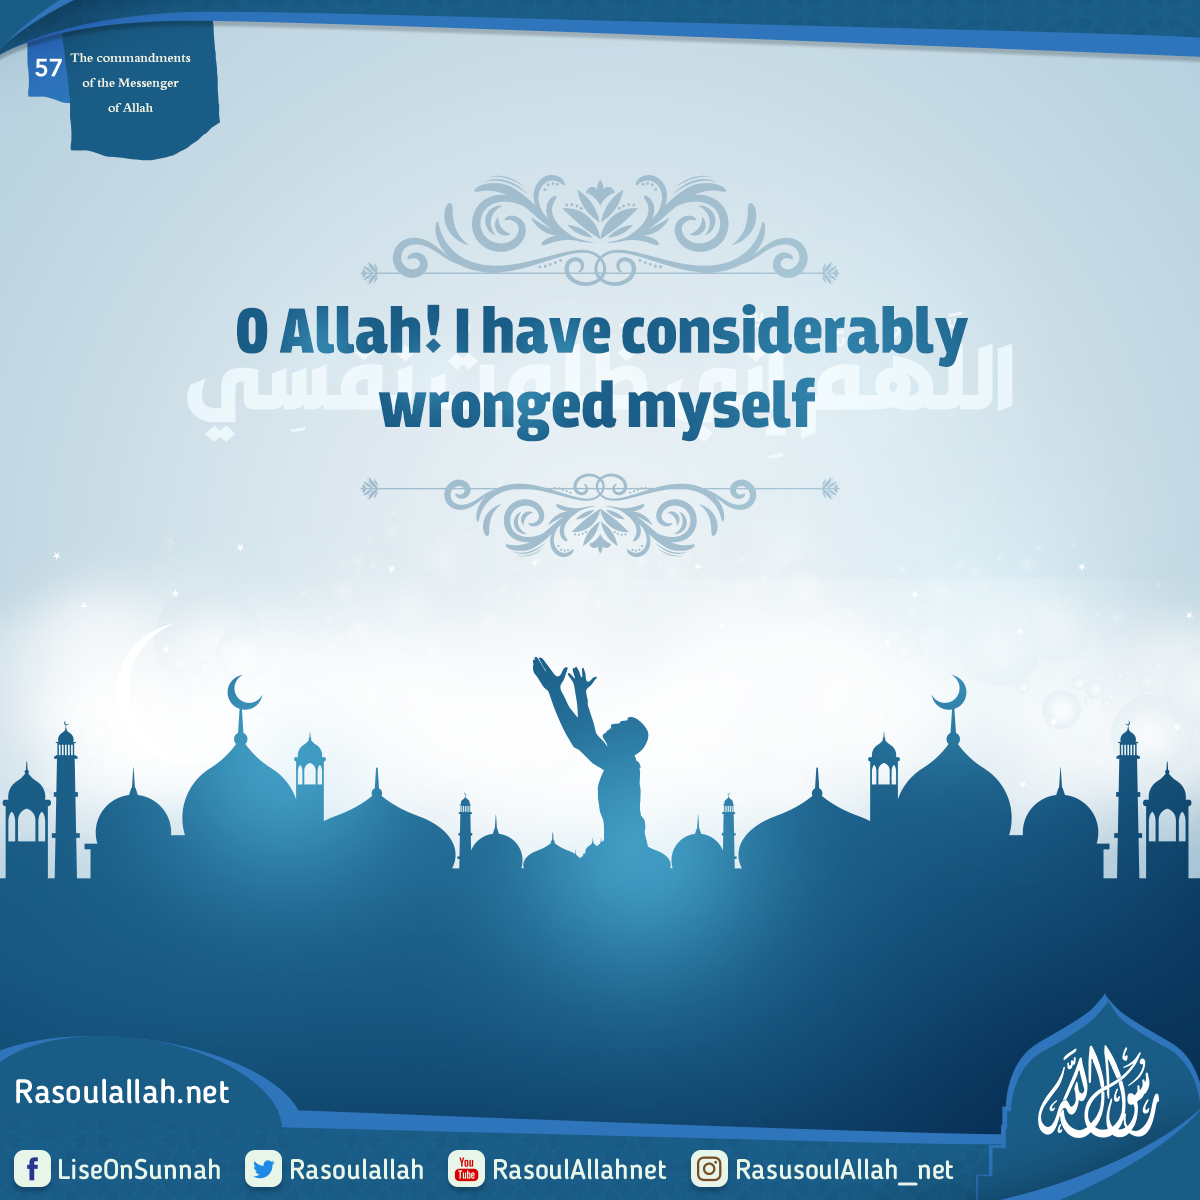 O Allah! I have considerably wronged myself